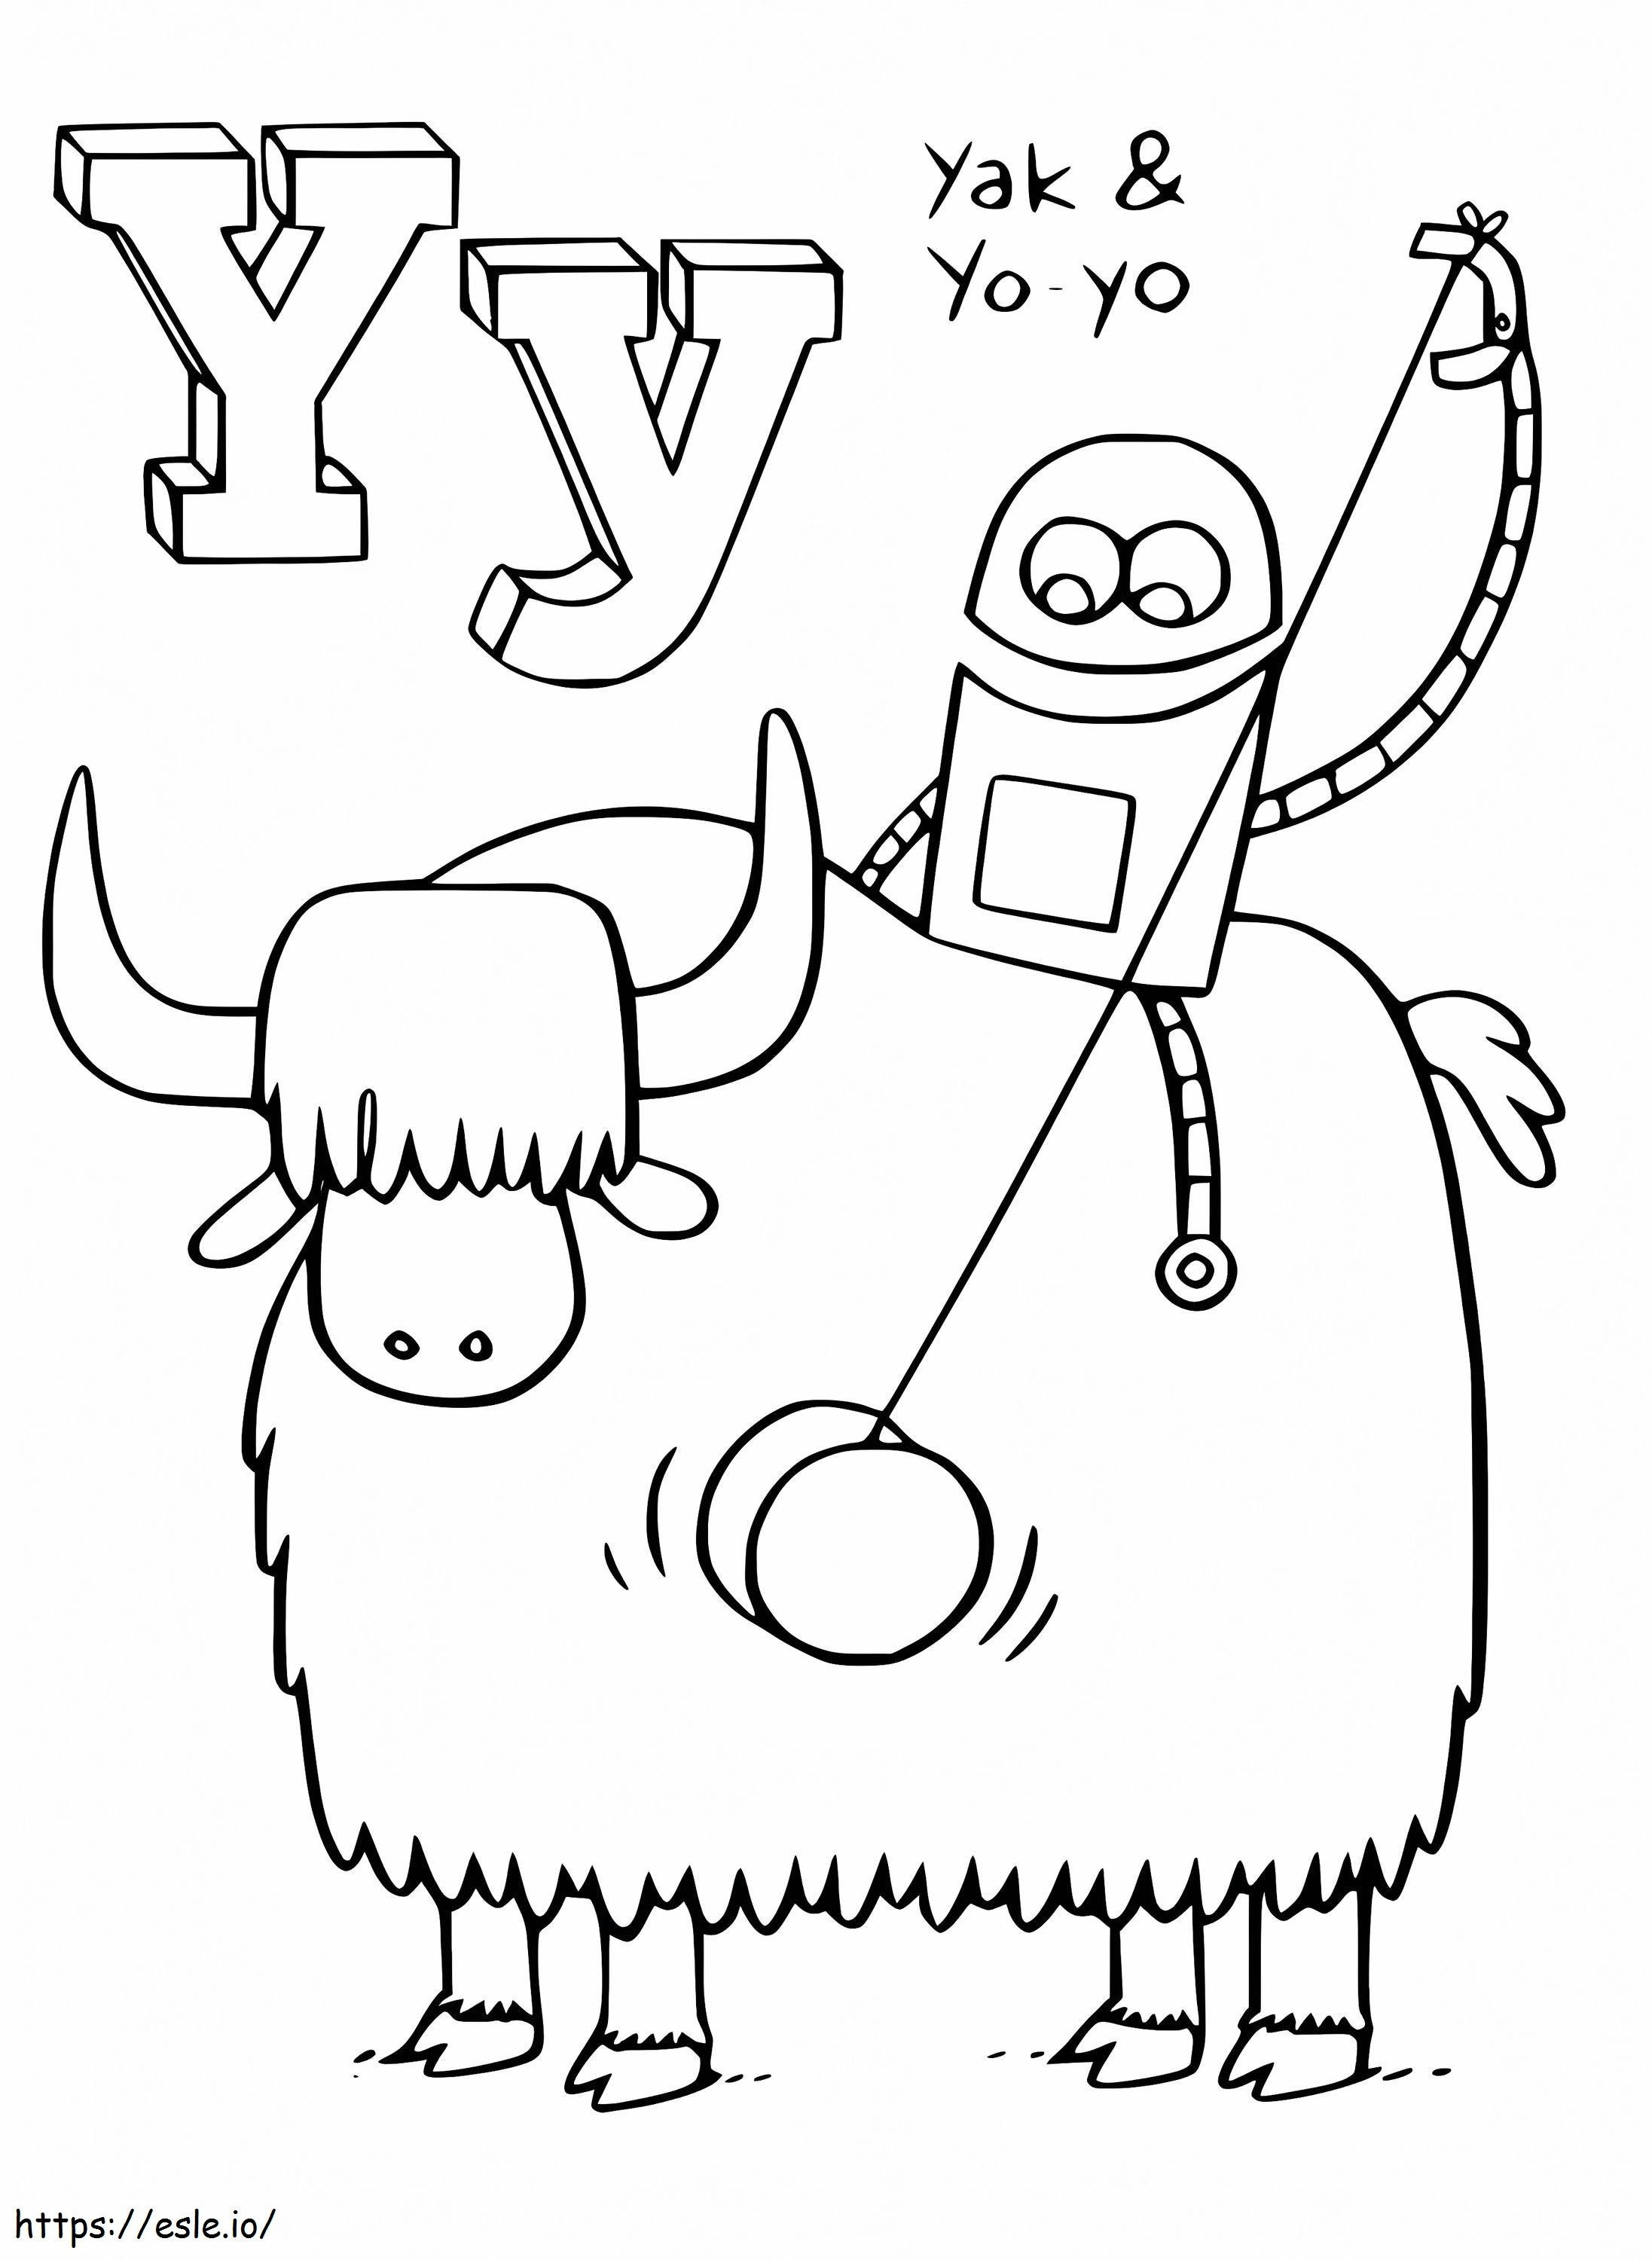 StoryBots Letter Y coloring page